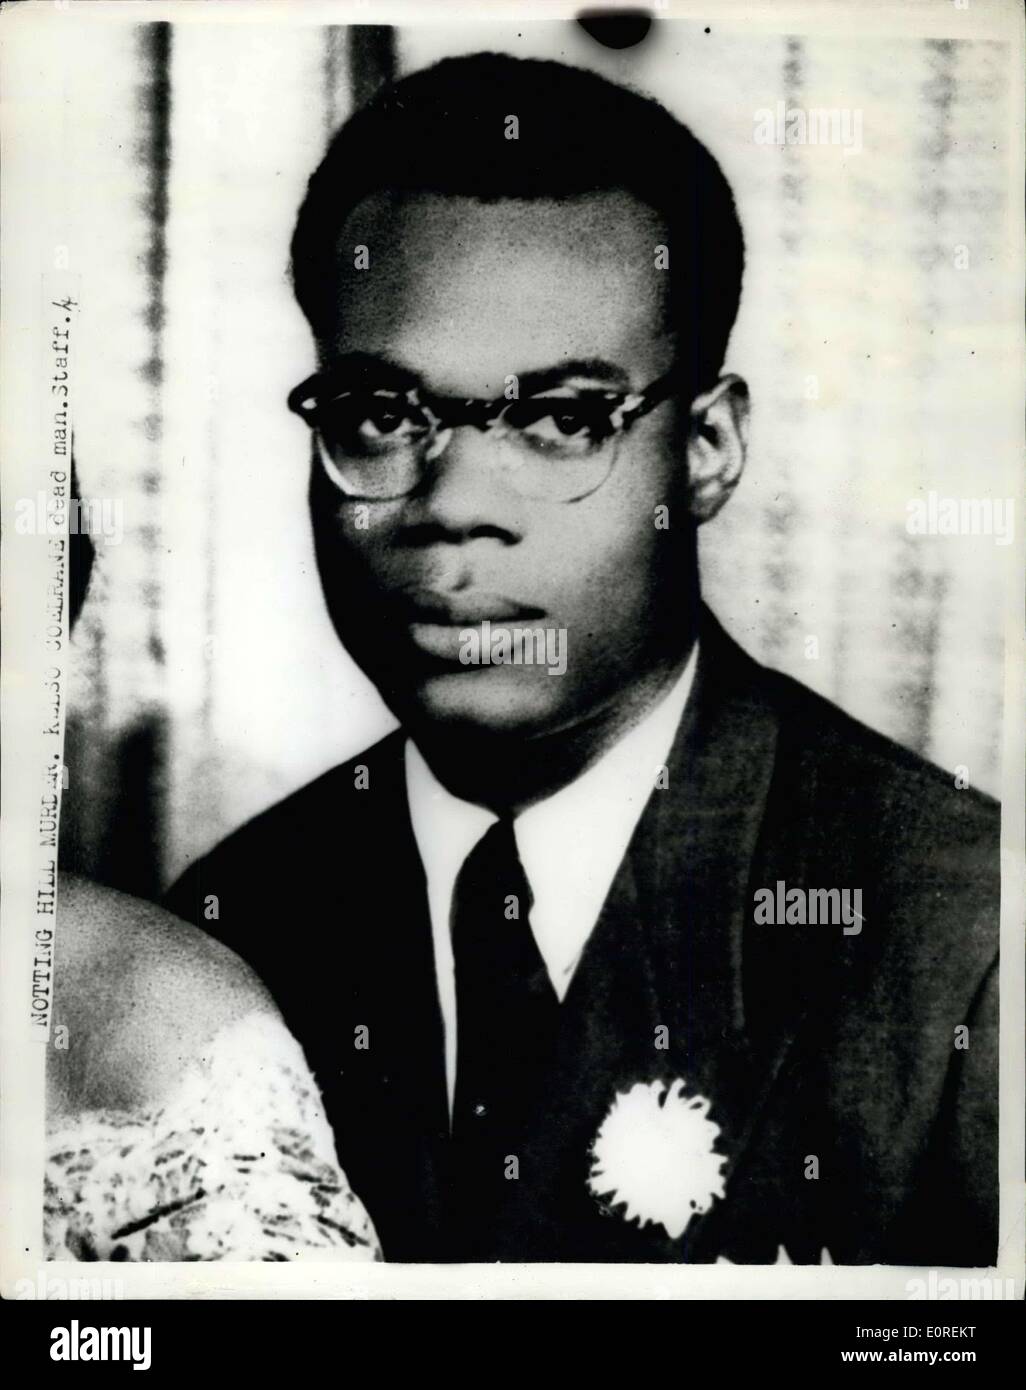 May 18, 1959 - Jamaican murdered in Race Riot area of London: A 32-year old West Indian, Kelso Benjamin Cochrane, a carpenter, was walking home to Bevington-road North kinsington, after attending hospital with a broken thumb early yesterday, when a group of youths challenged him on a street corner: ''Where are you going Jim Crow''. A running fight developed and Cochrane was stabbed in the chest. Two coloured men took him to hospital by taxi, but he died a few minutes after admission. The murder occurred in the Notting Hill area - scene of last year's racial disturbances Stock Photo